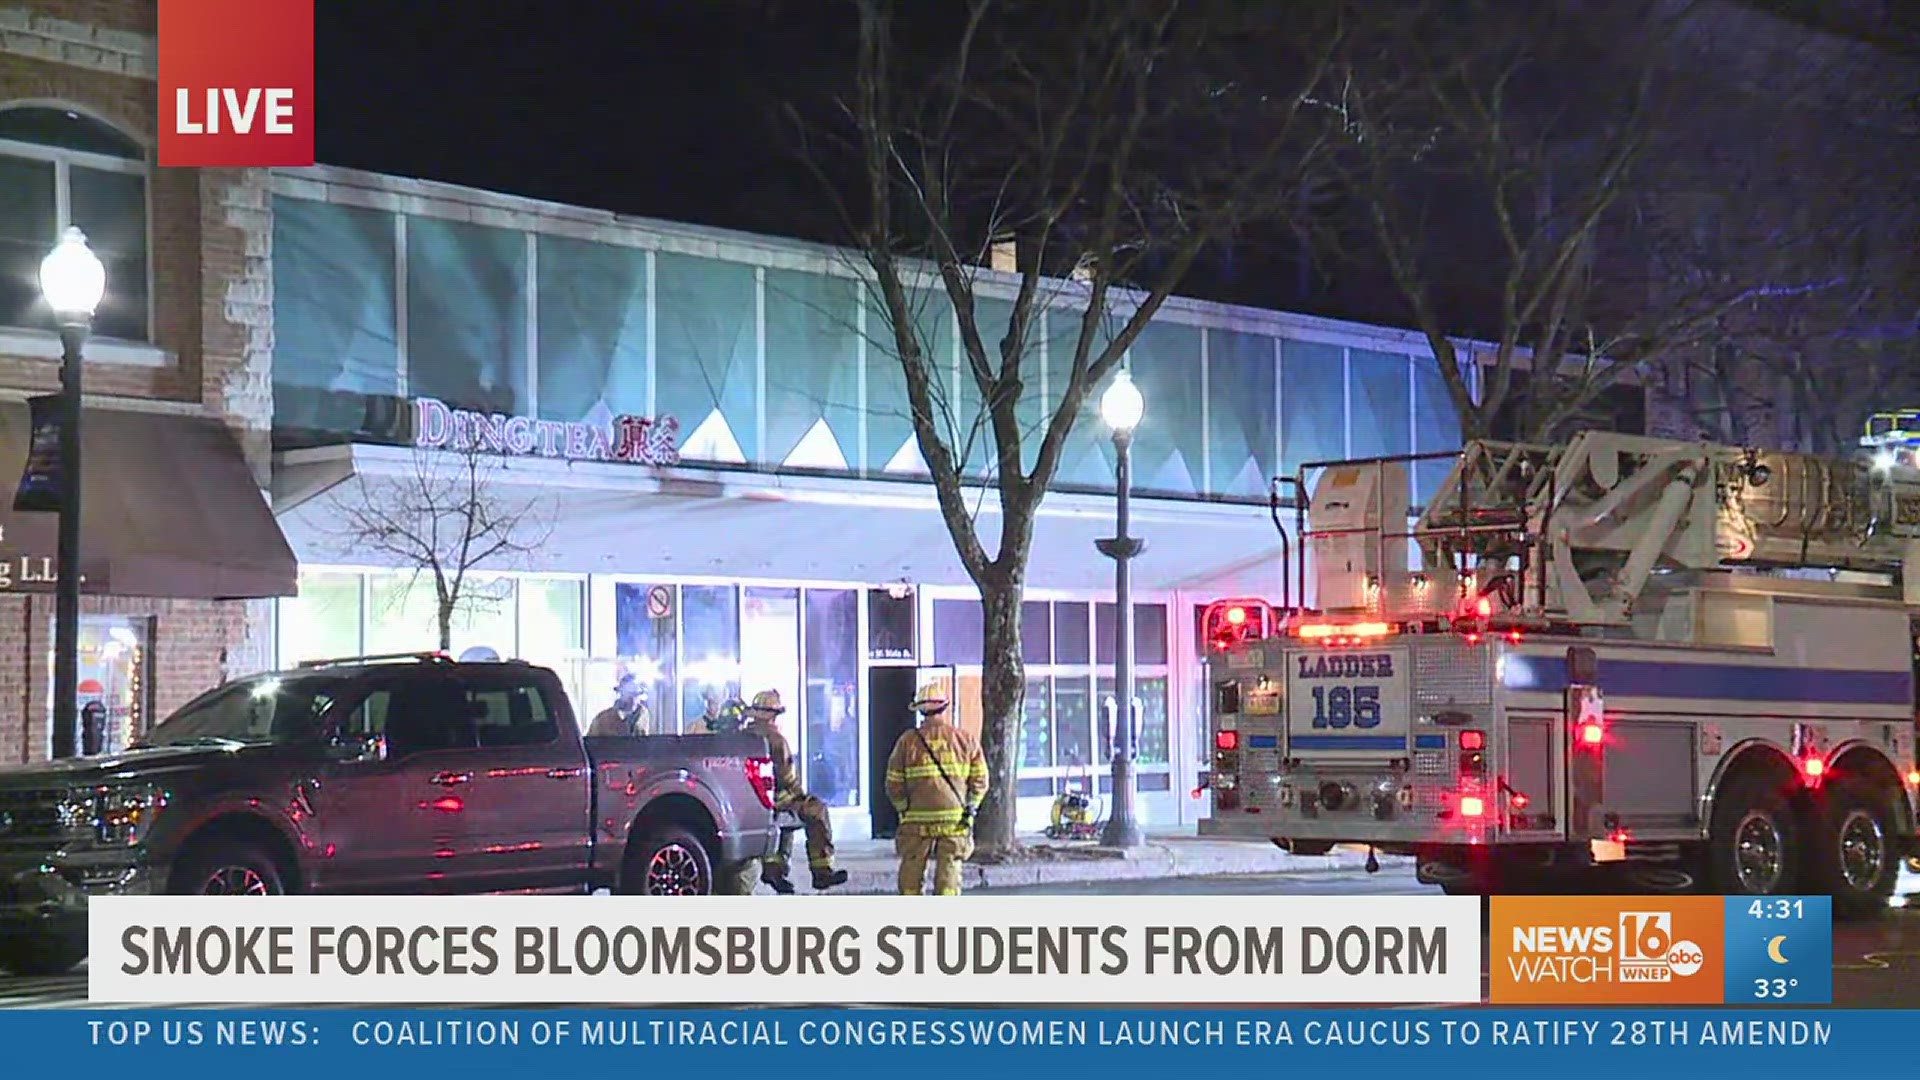 An early wake-up for some students at Bloomsburg University students.